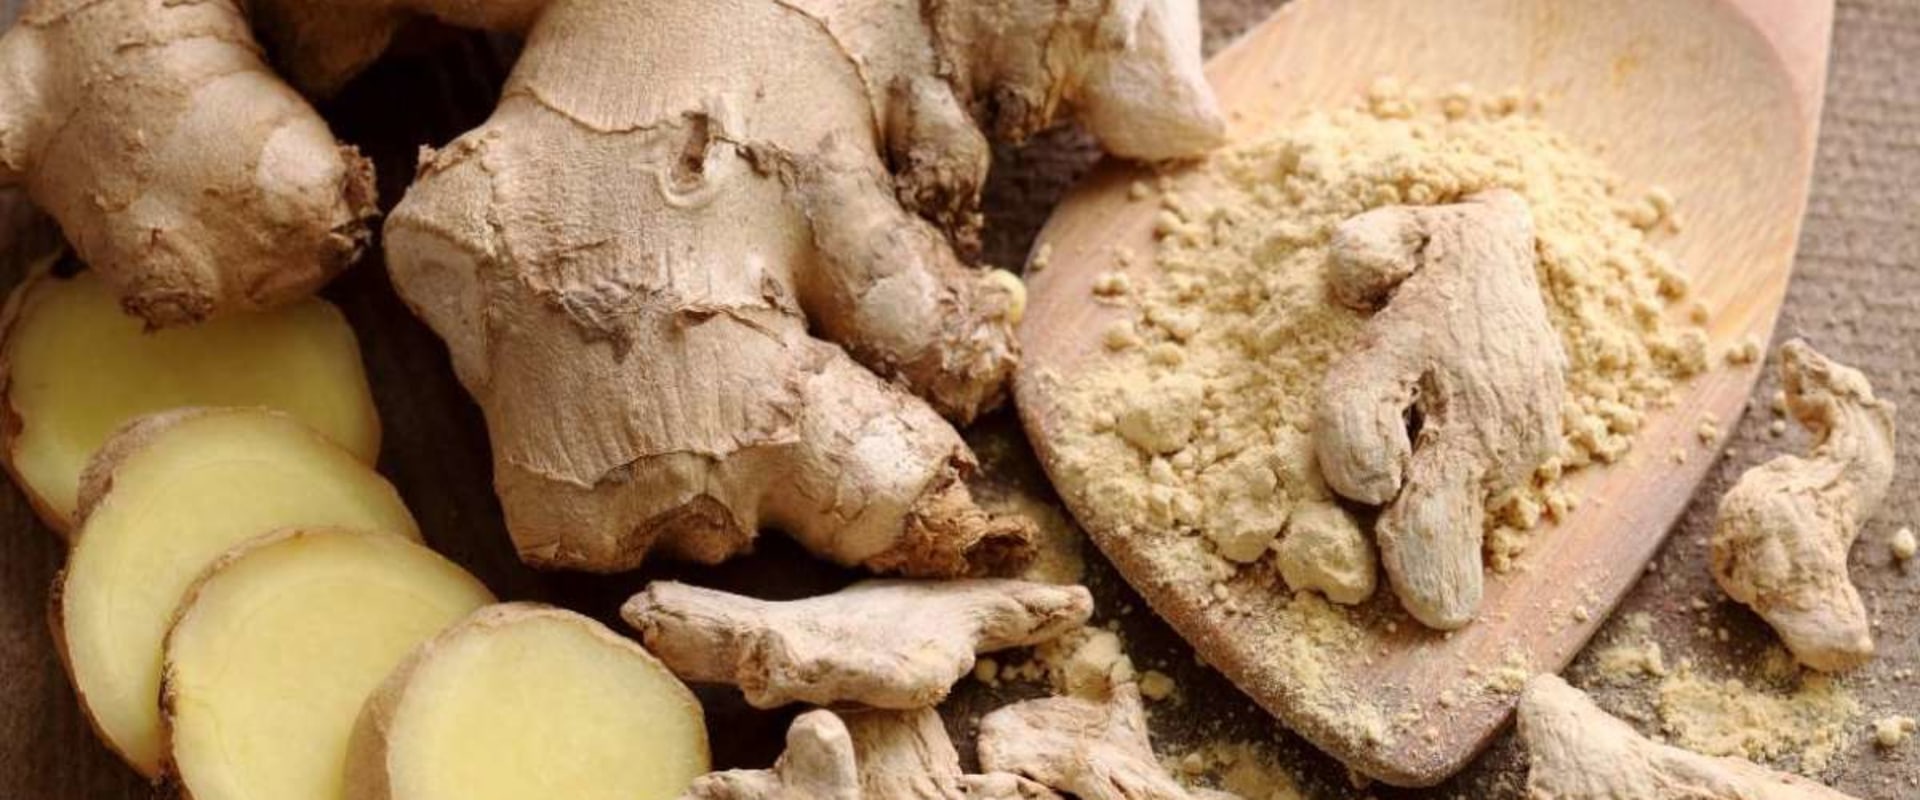 How Much Ginger Should Women Take Daily?